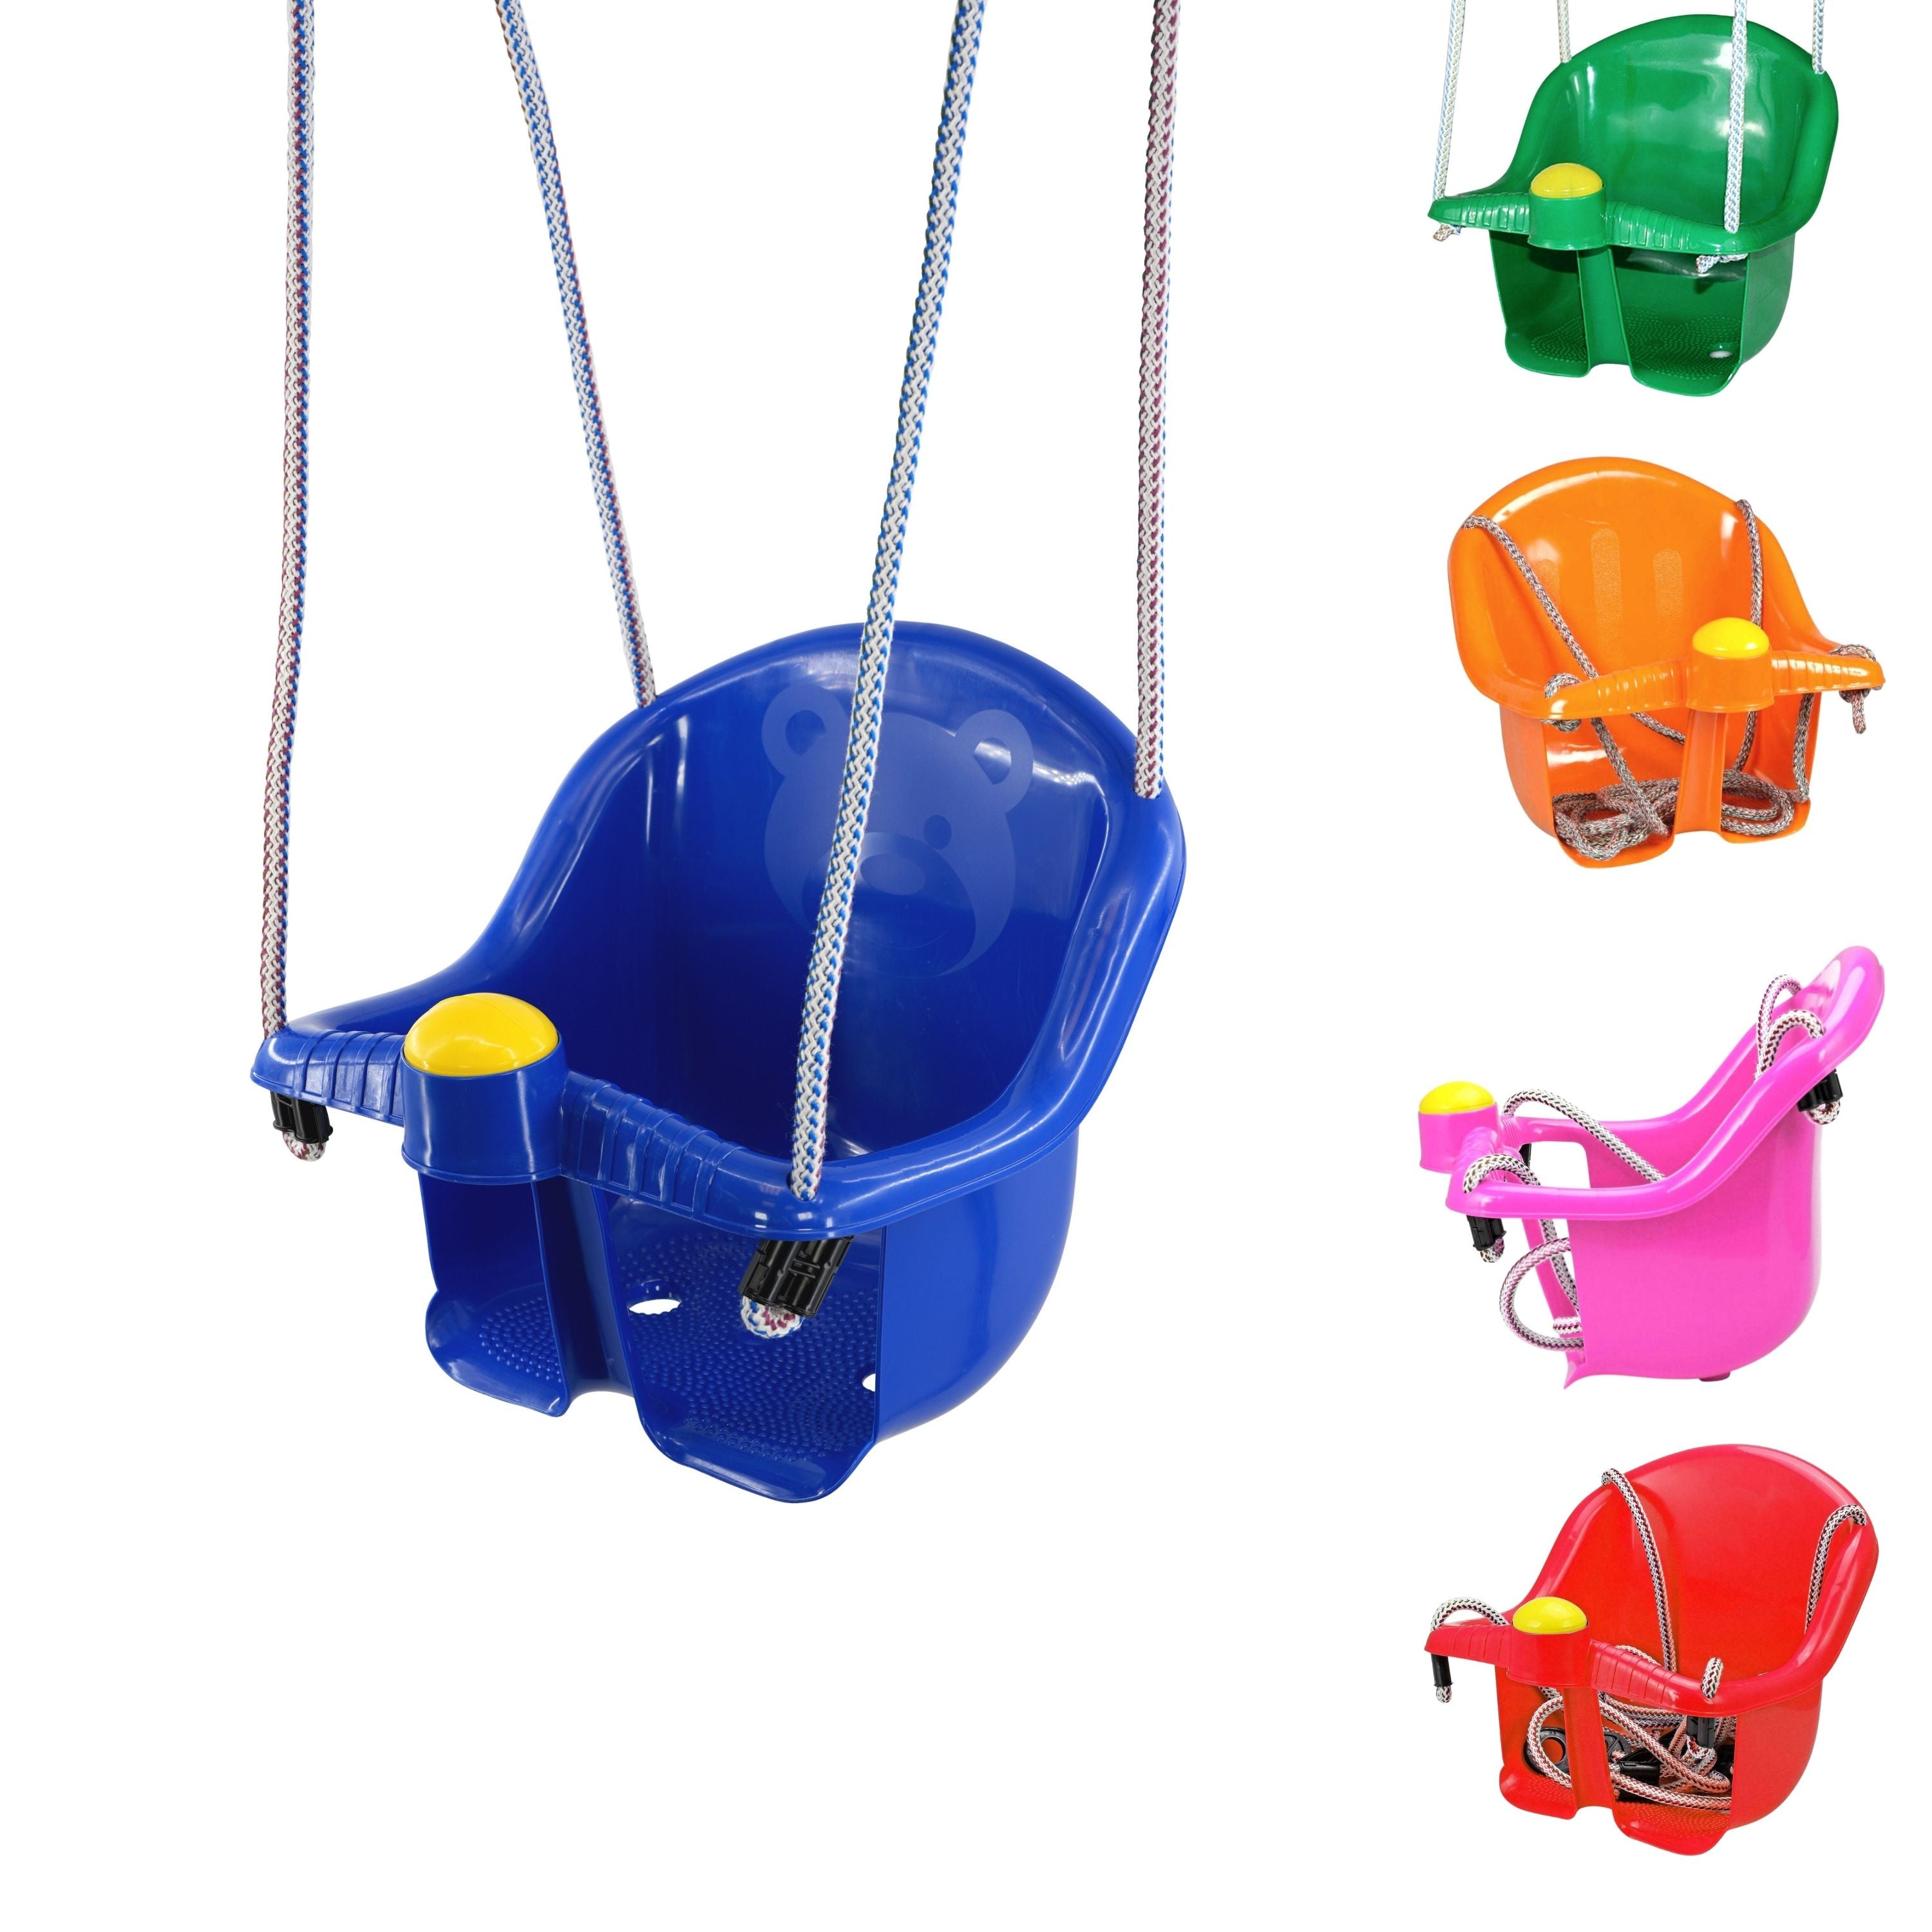 Toddler Safety Safe Swing Seat with Adjustable Garden Rope by The Magic Toy  ShopThe Magic Toy Shop